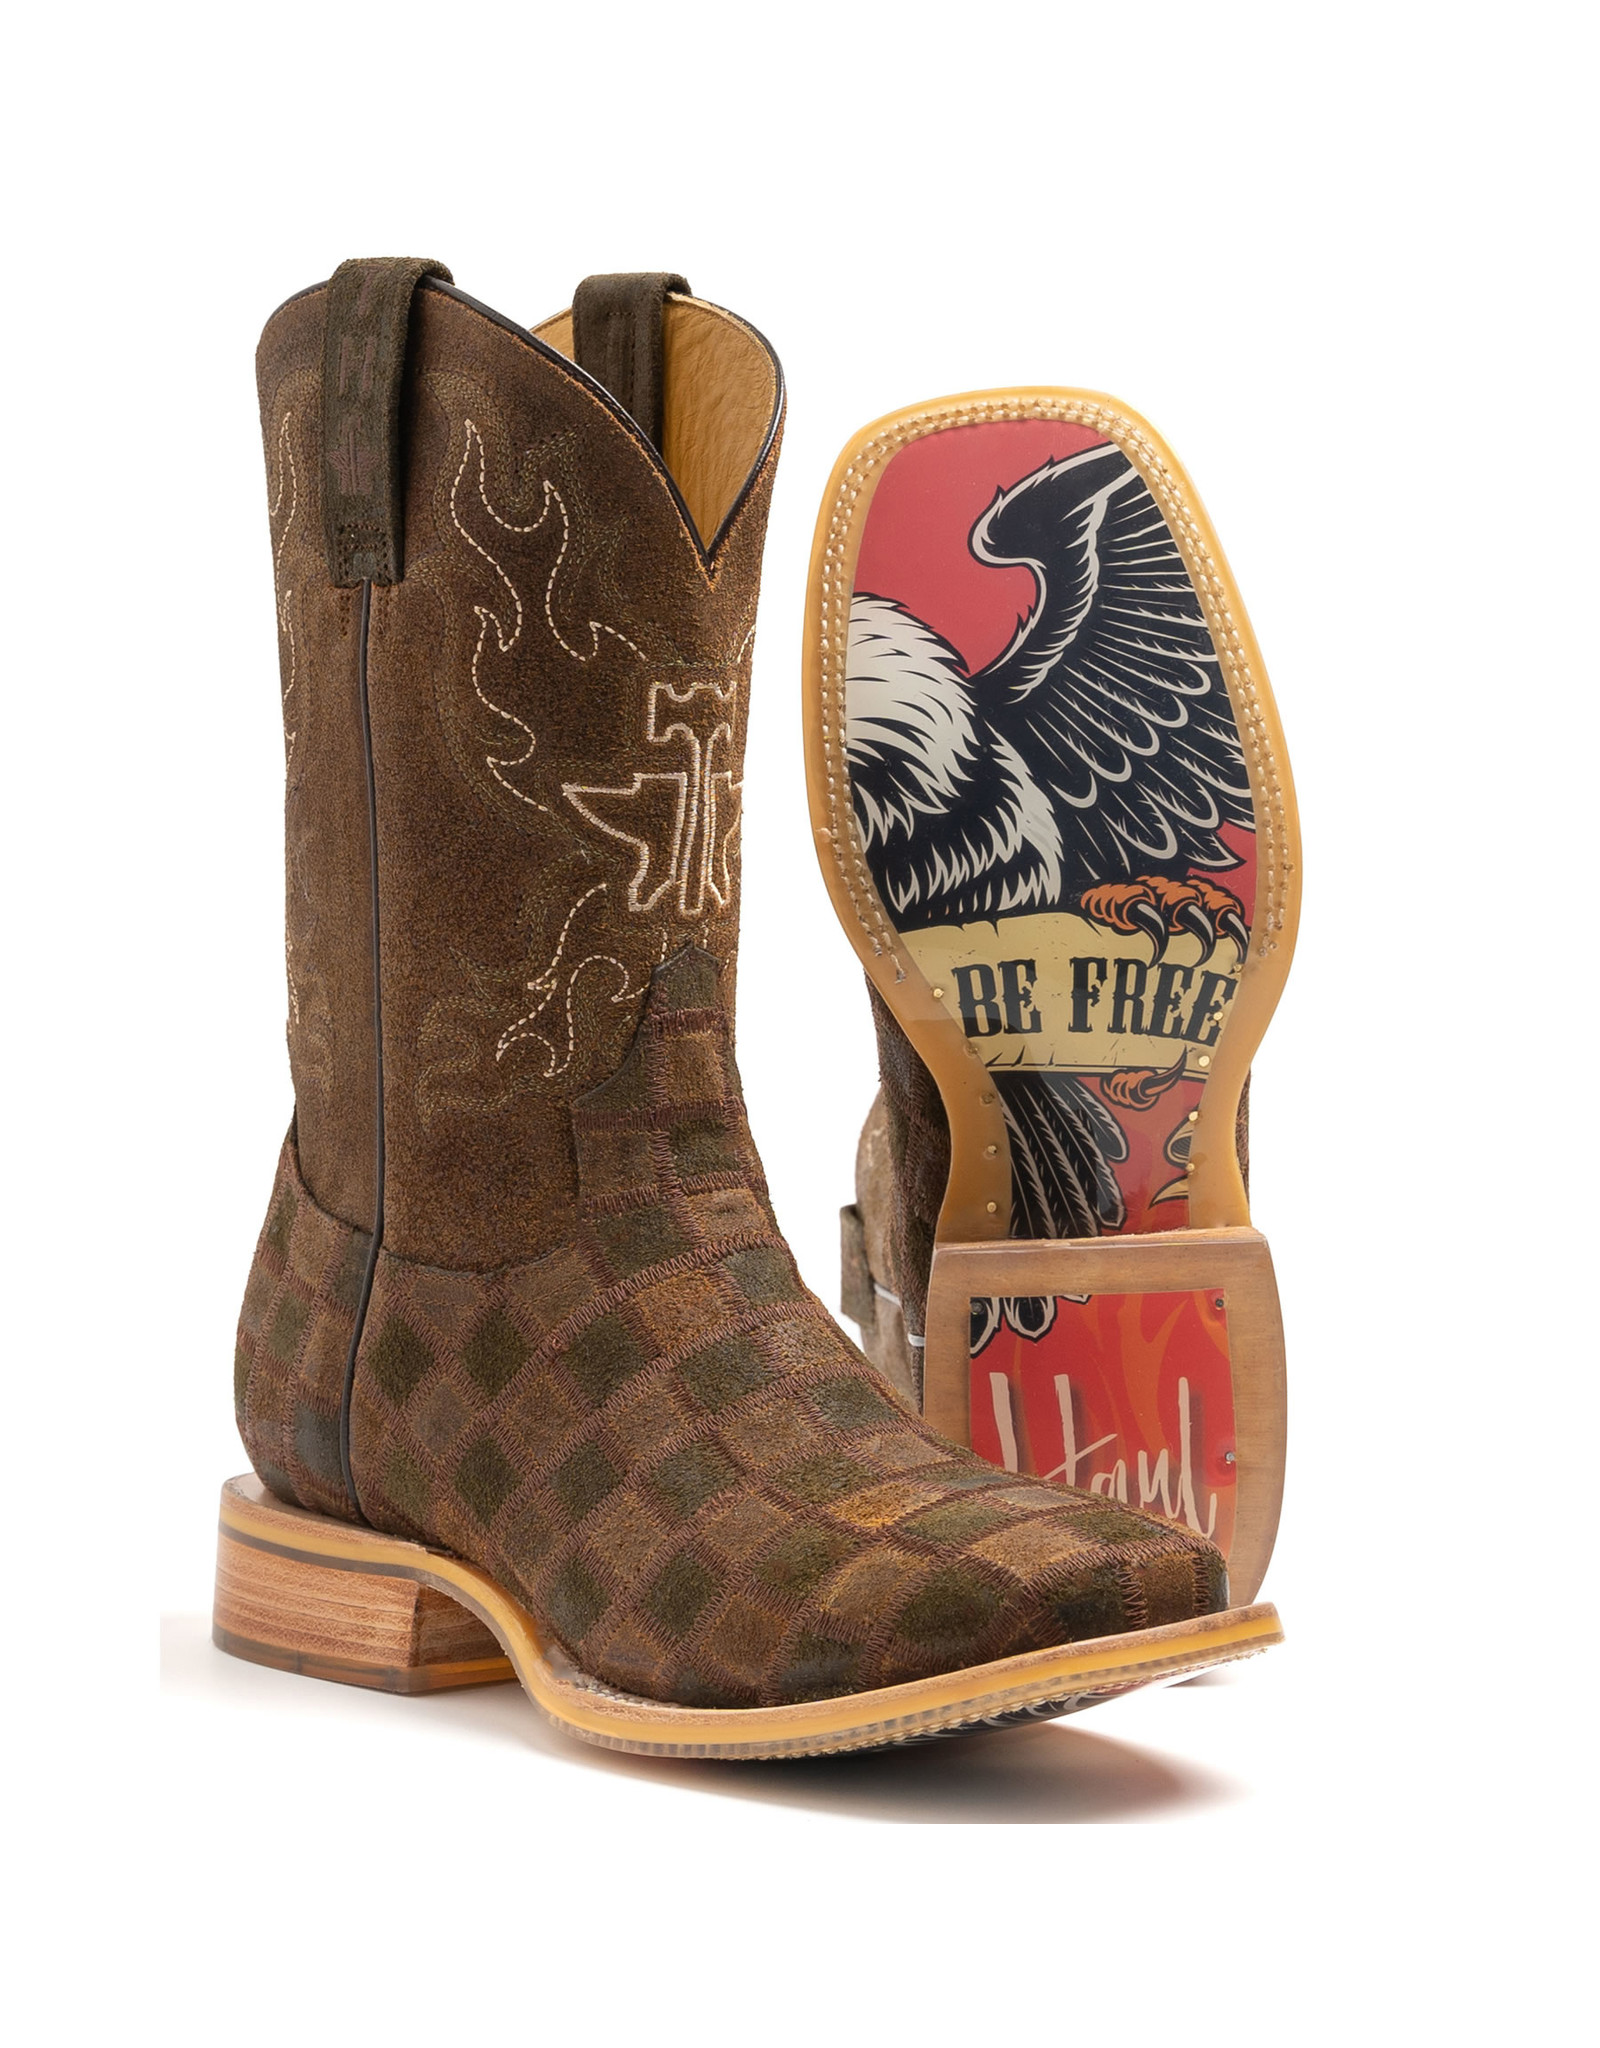 Tin Haul Men’s Rough Patch Roughout Patchwork with Bald Eagle Sole 14-020-0077-0445 GR Western Boots